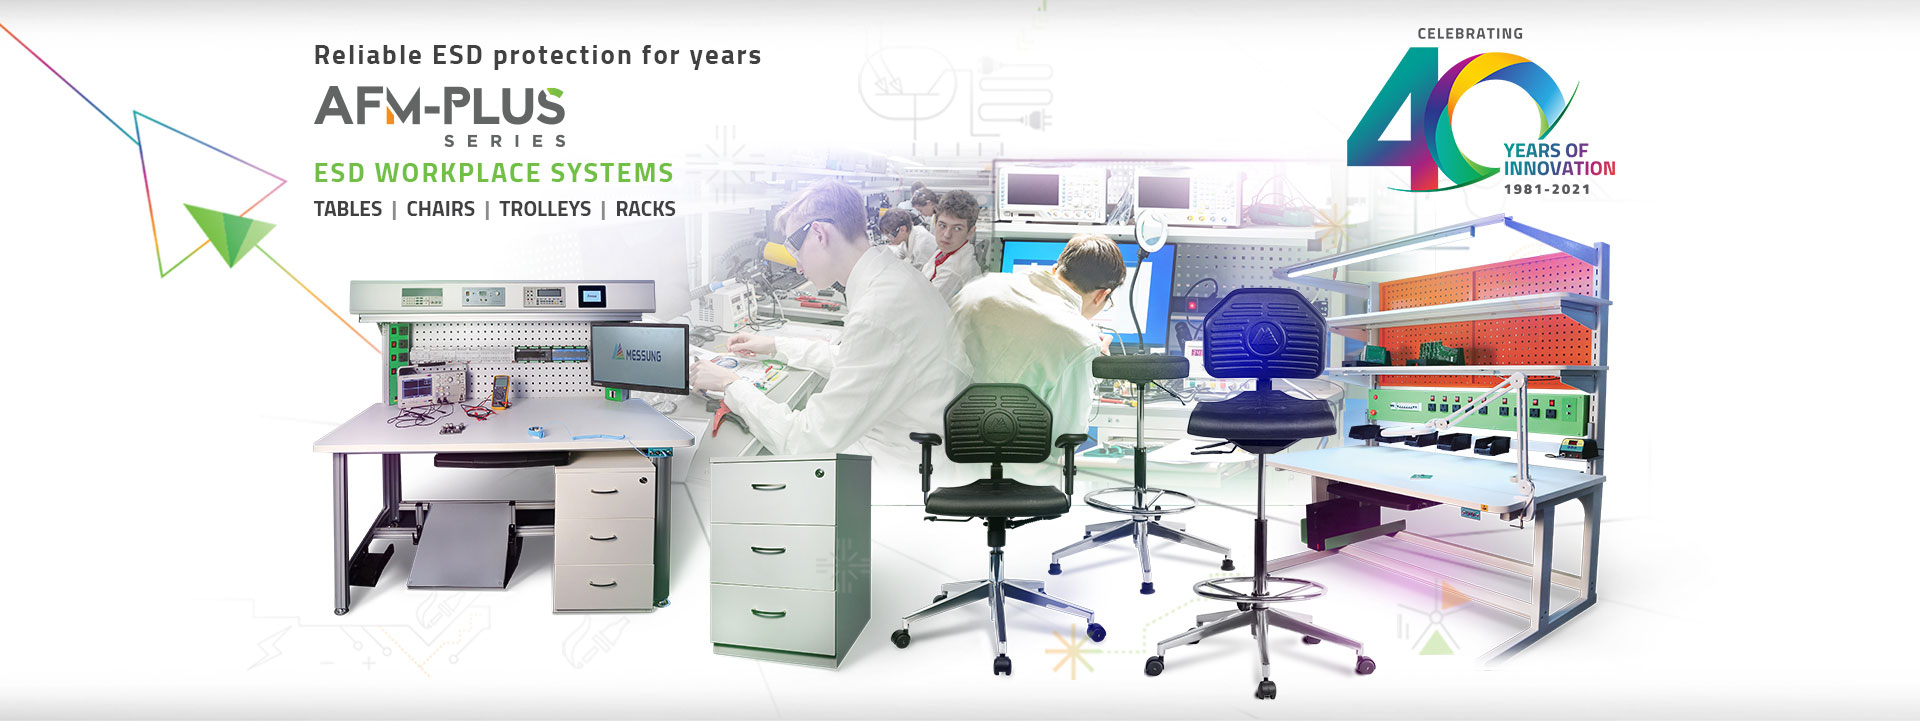 esd workplace systems